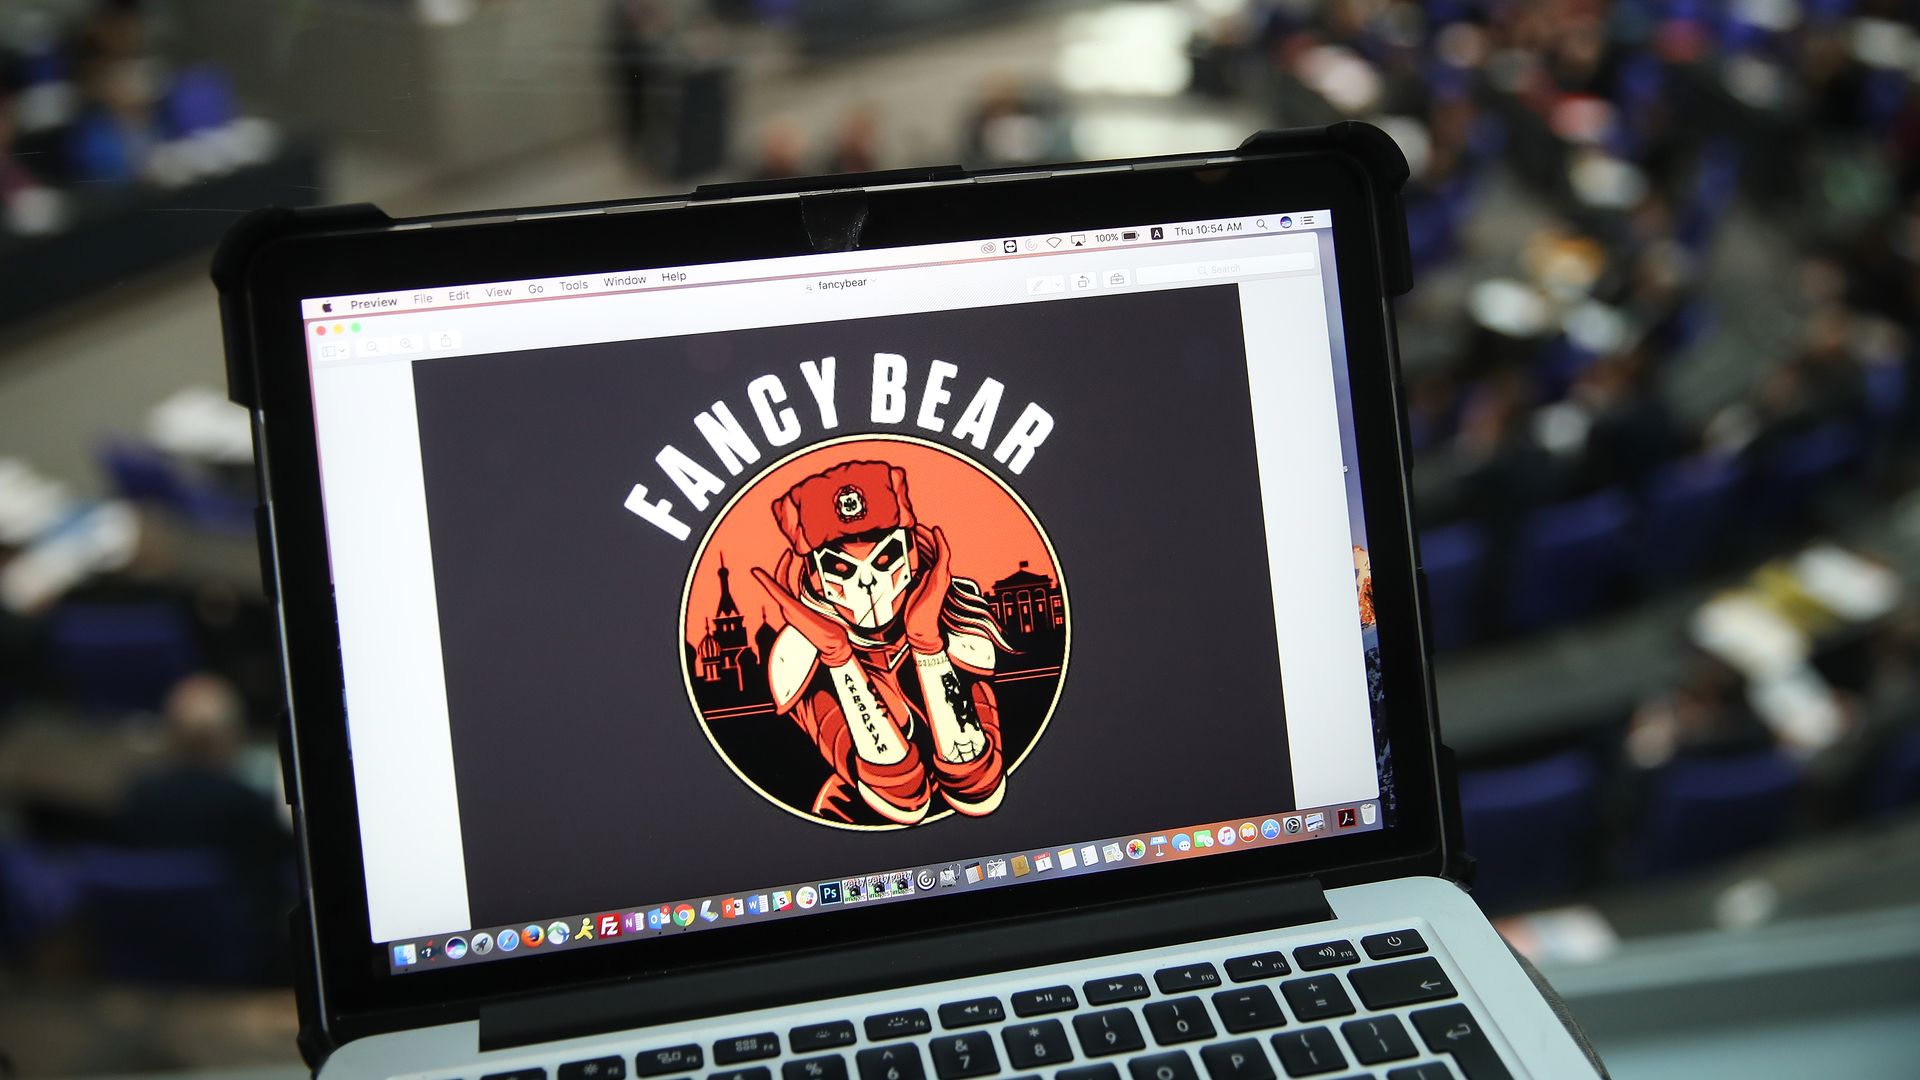 Laptop showing a logo for suspected-Russian hackers Fancy Bear, designed by security company Crowdstrike